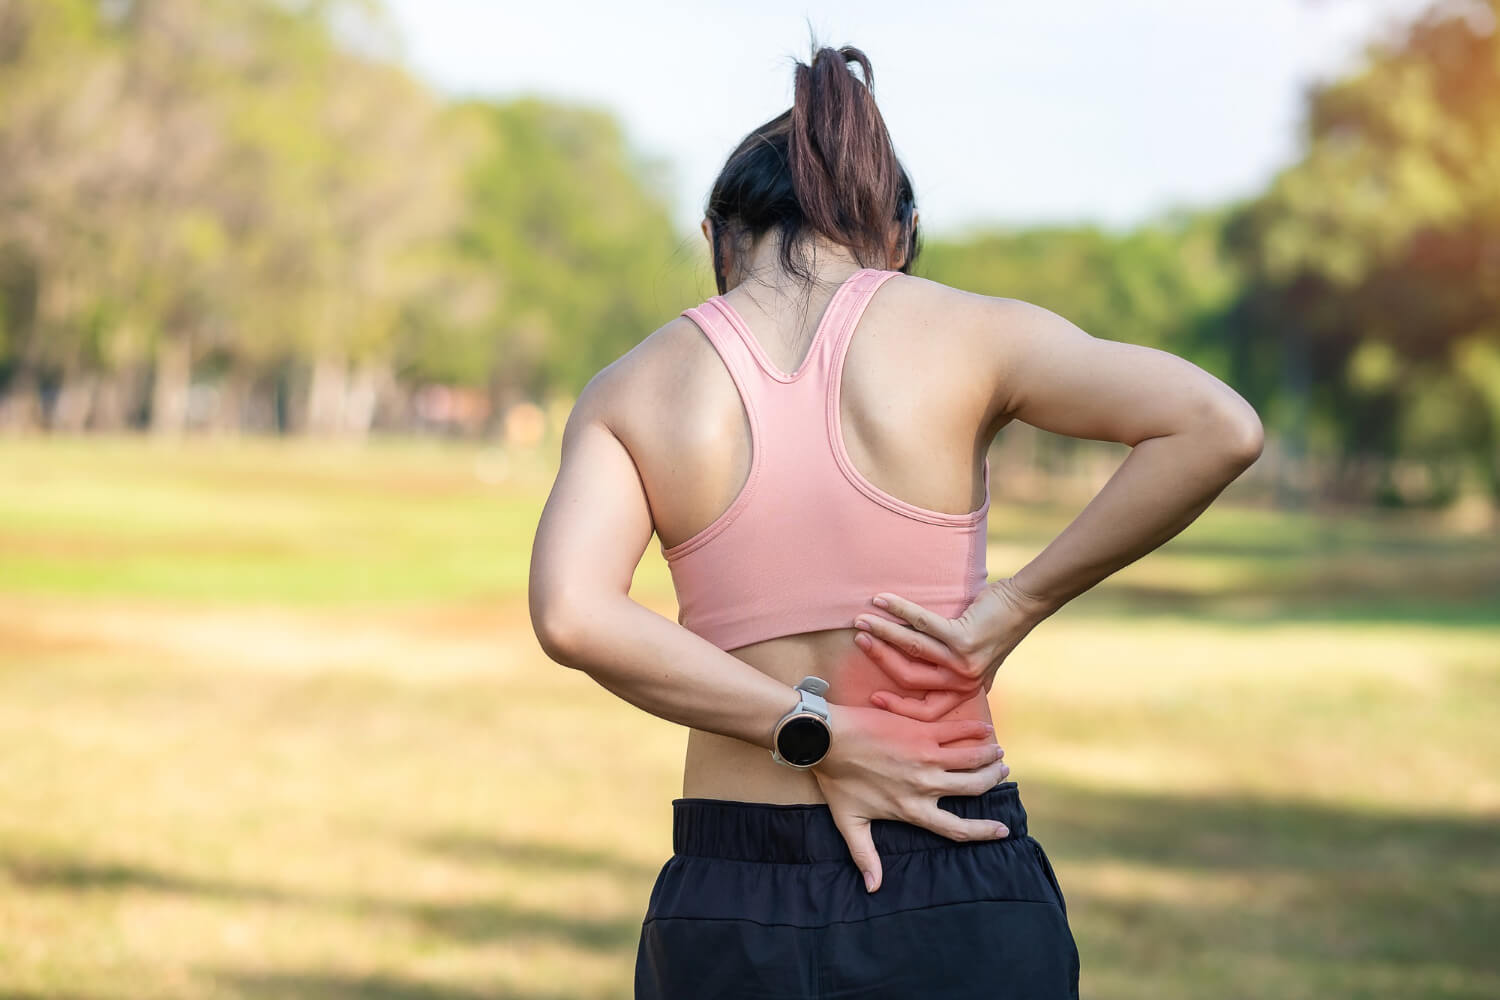 Why Choose Revitalize for Sciatica Pain Treatment?